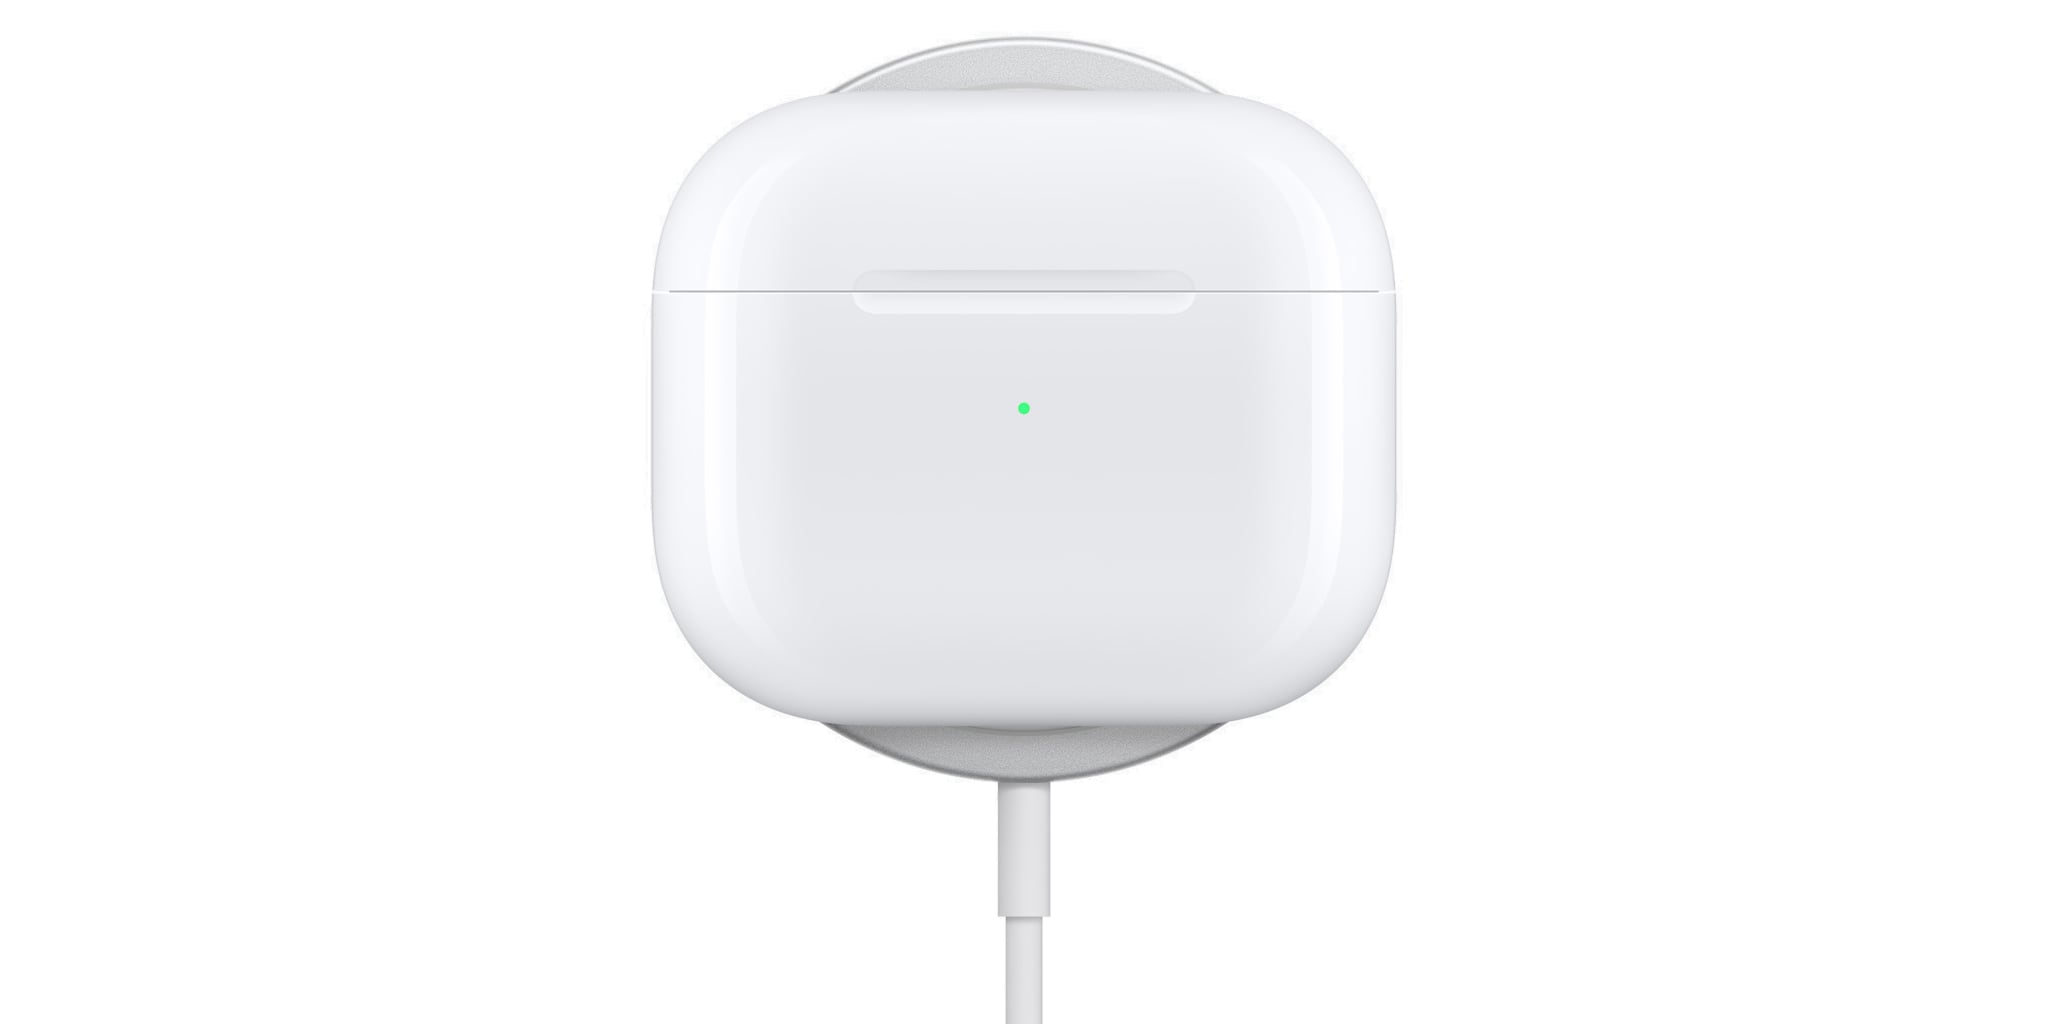 Apple's marketing image showing the AirPods 3 charging case sitting on a MagSafe wireless charging puck